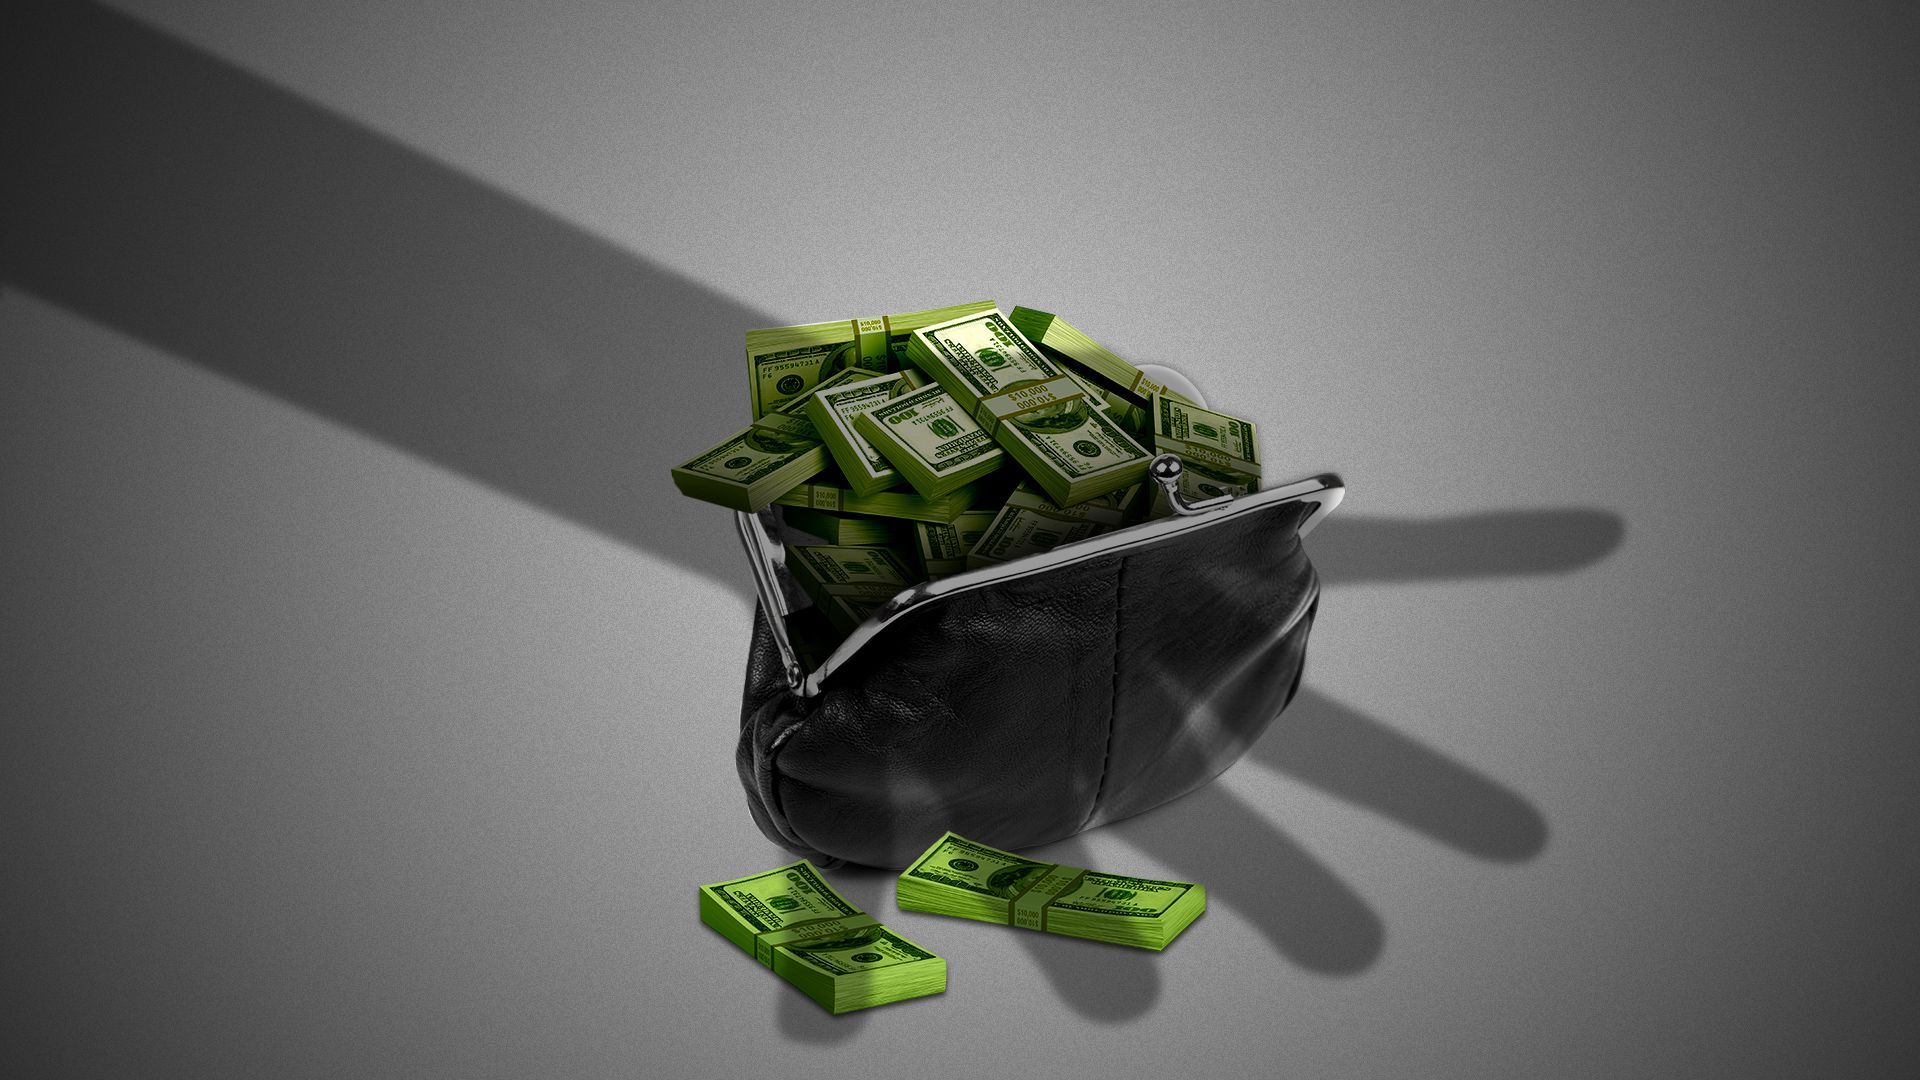 Illustration of a coin purse full of stacks of money with a shadow of a hand hovering over it menacingly. 